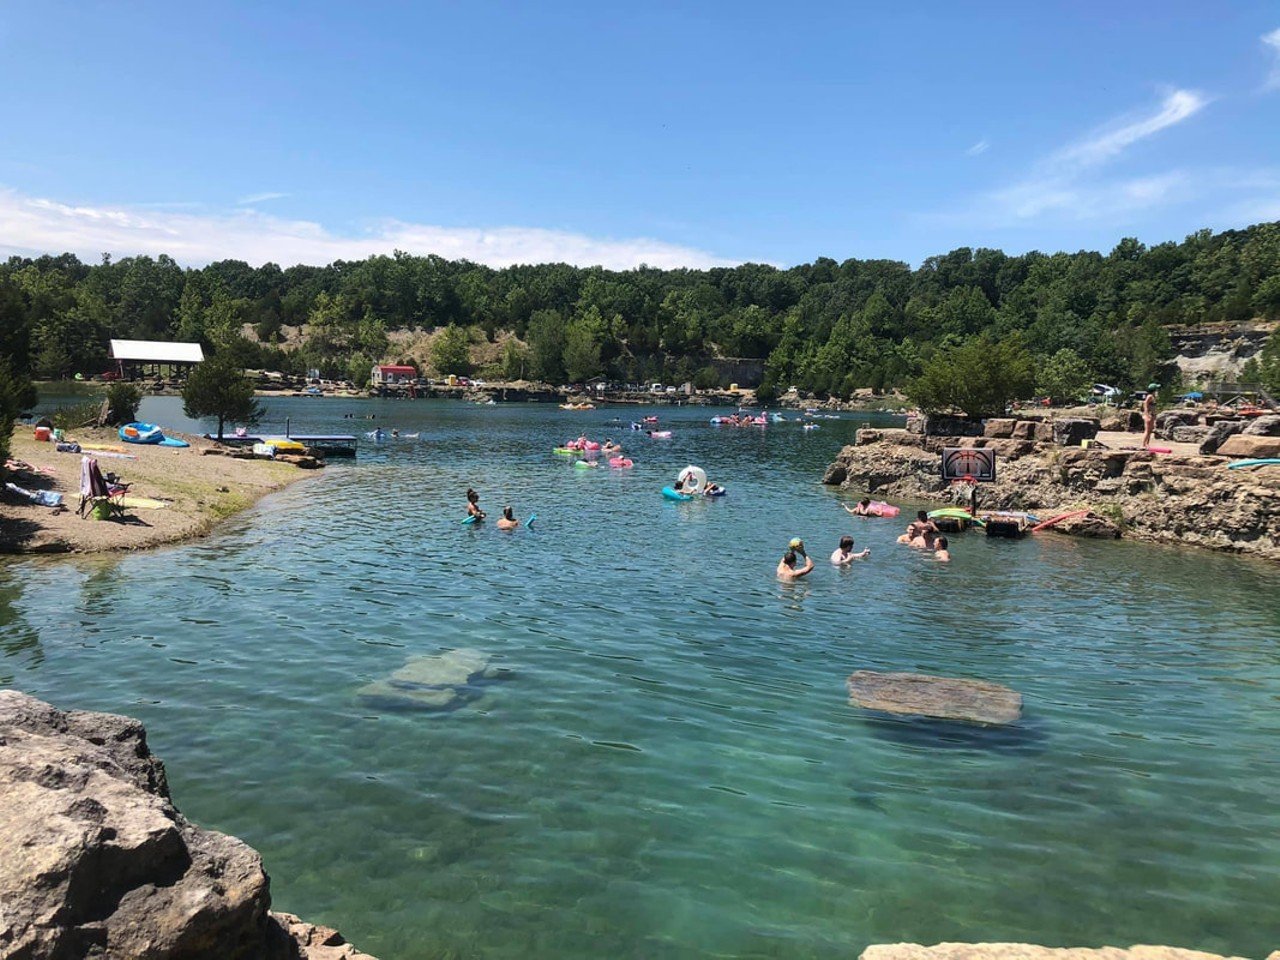 Falling Rock Quarry
2201 Fendley Mill Rd  
This 18 and up only quarry is perfect for lounging, swimming and adventuring. You can snorkel, paddleboard, pedal boat, kayak, canoe, play sand volleyball or relax in the water. It&#146;s $10 to reserve your spot and $25 for admission.